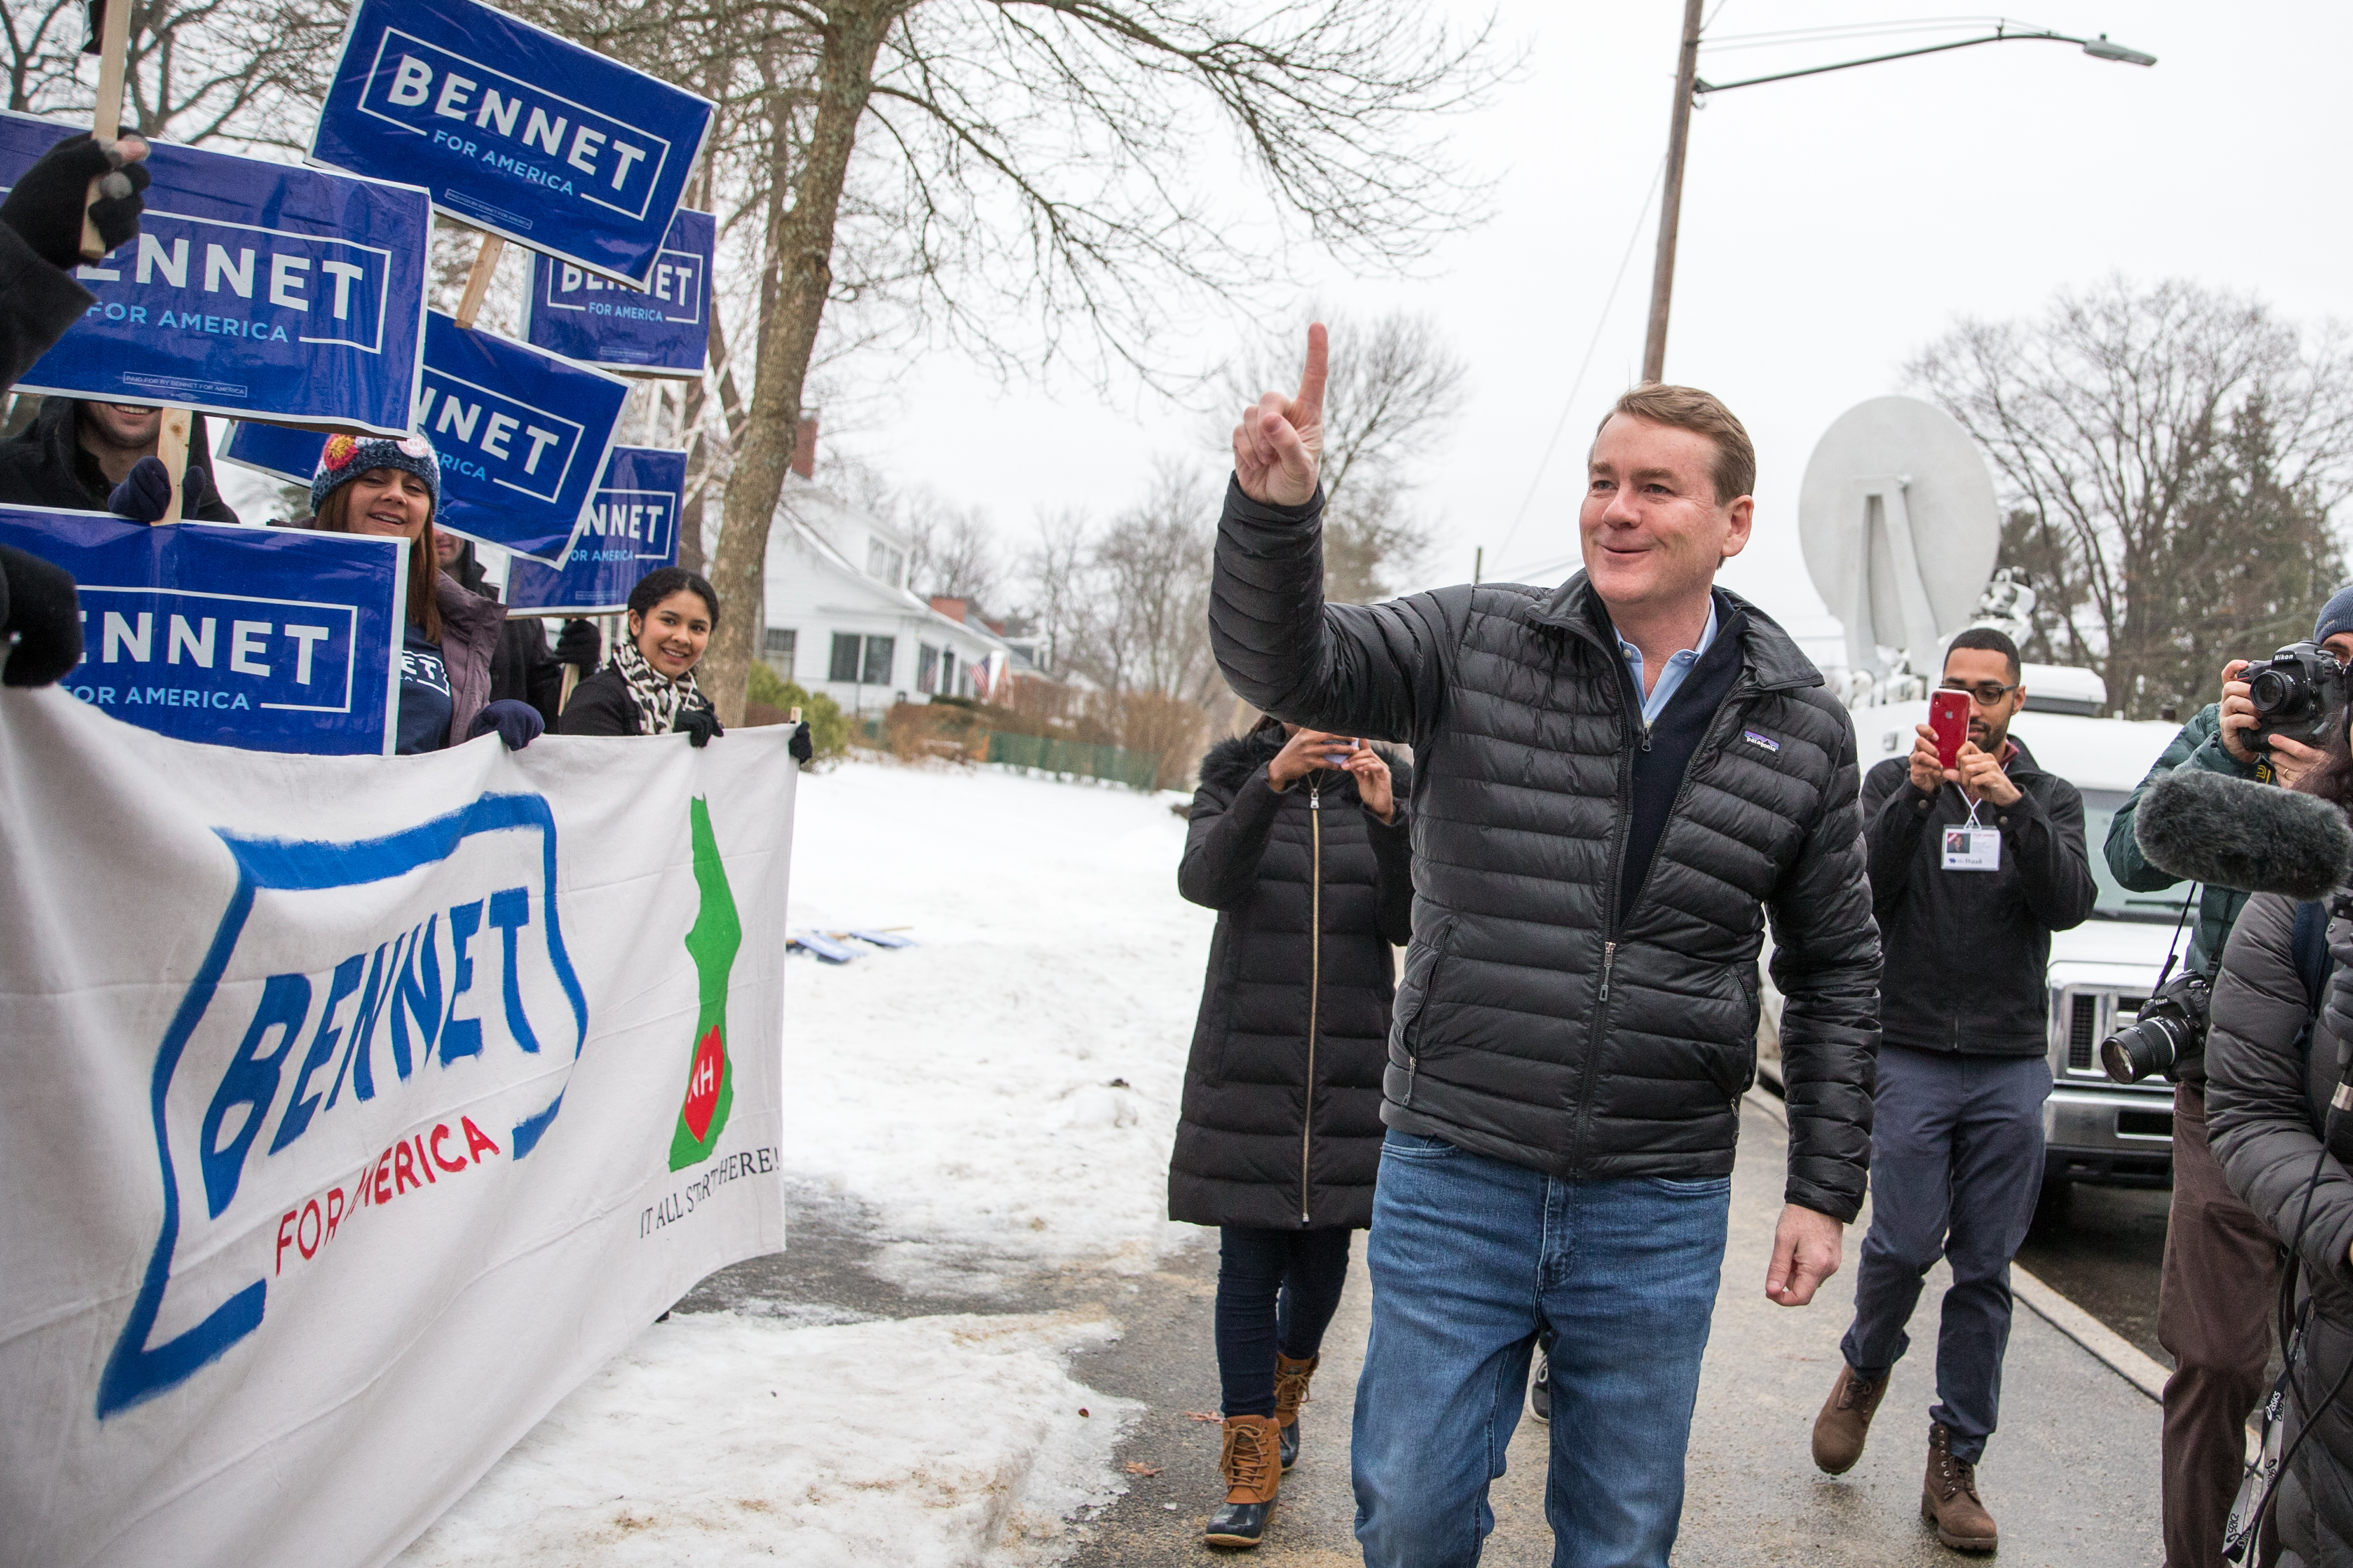 Democratic presidential candidate Sen. Michael Bennet (D-CO) greets supporters at the Webster Elementary School during the presidential primary on February 11, 2020 in Manchester, New Hampshire. (Scott Eisen/Getty Images)